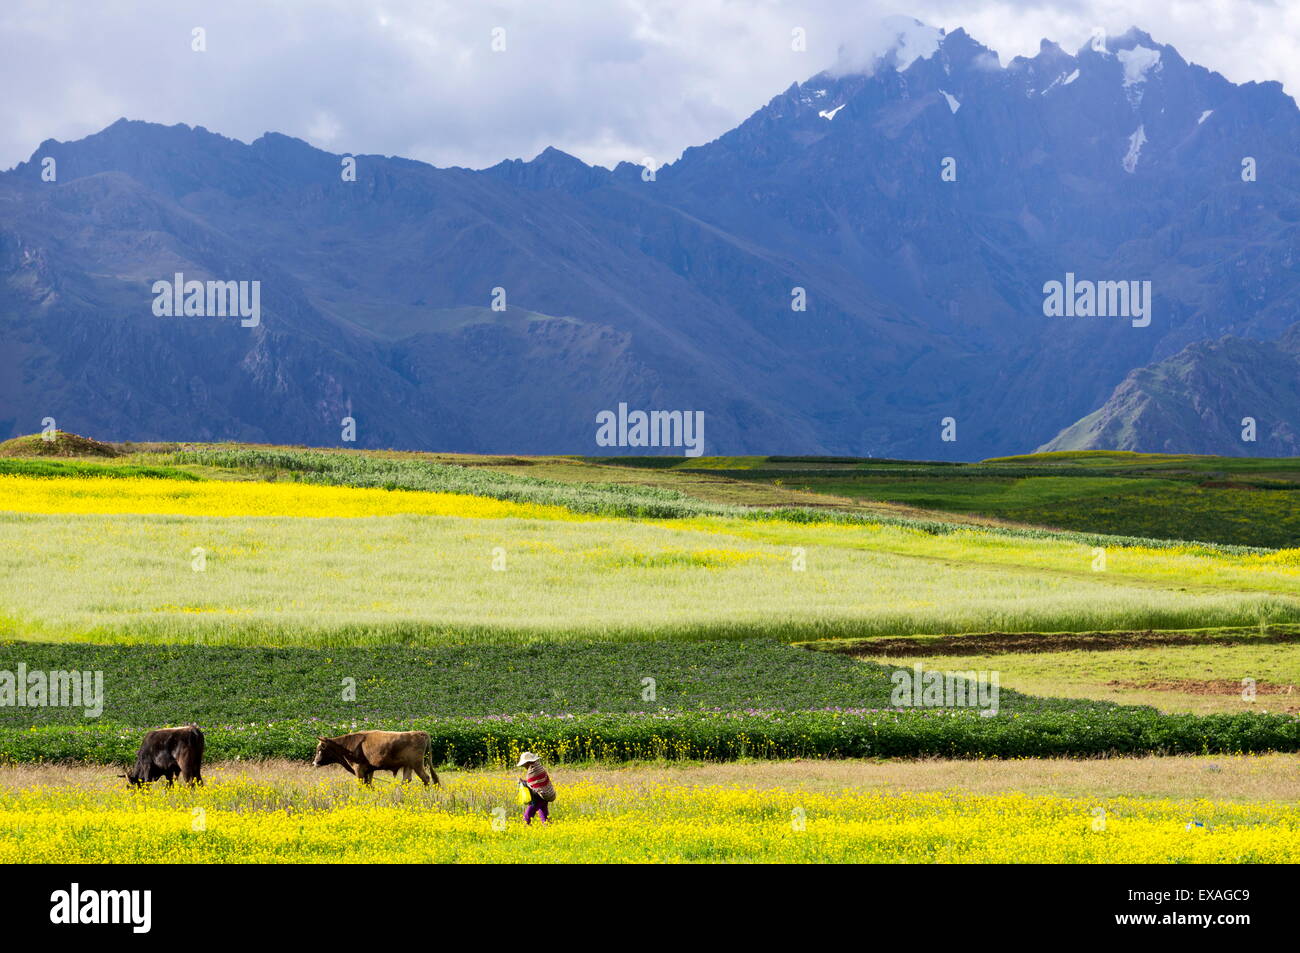 Cultivated fields and cattle, Moho, bordering on Lake Titicaca, Peru, South America Stock Photo